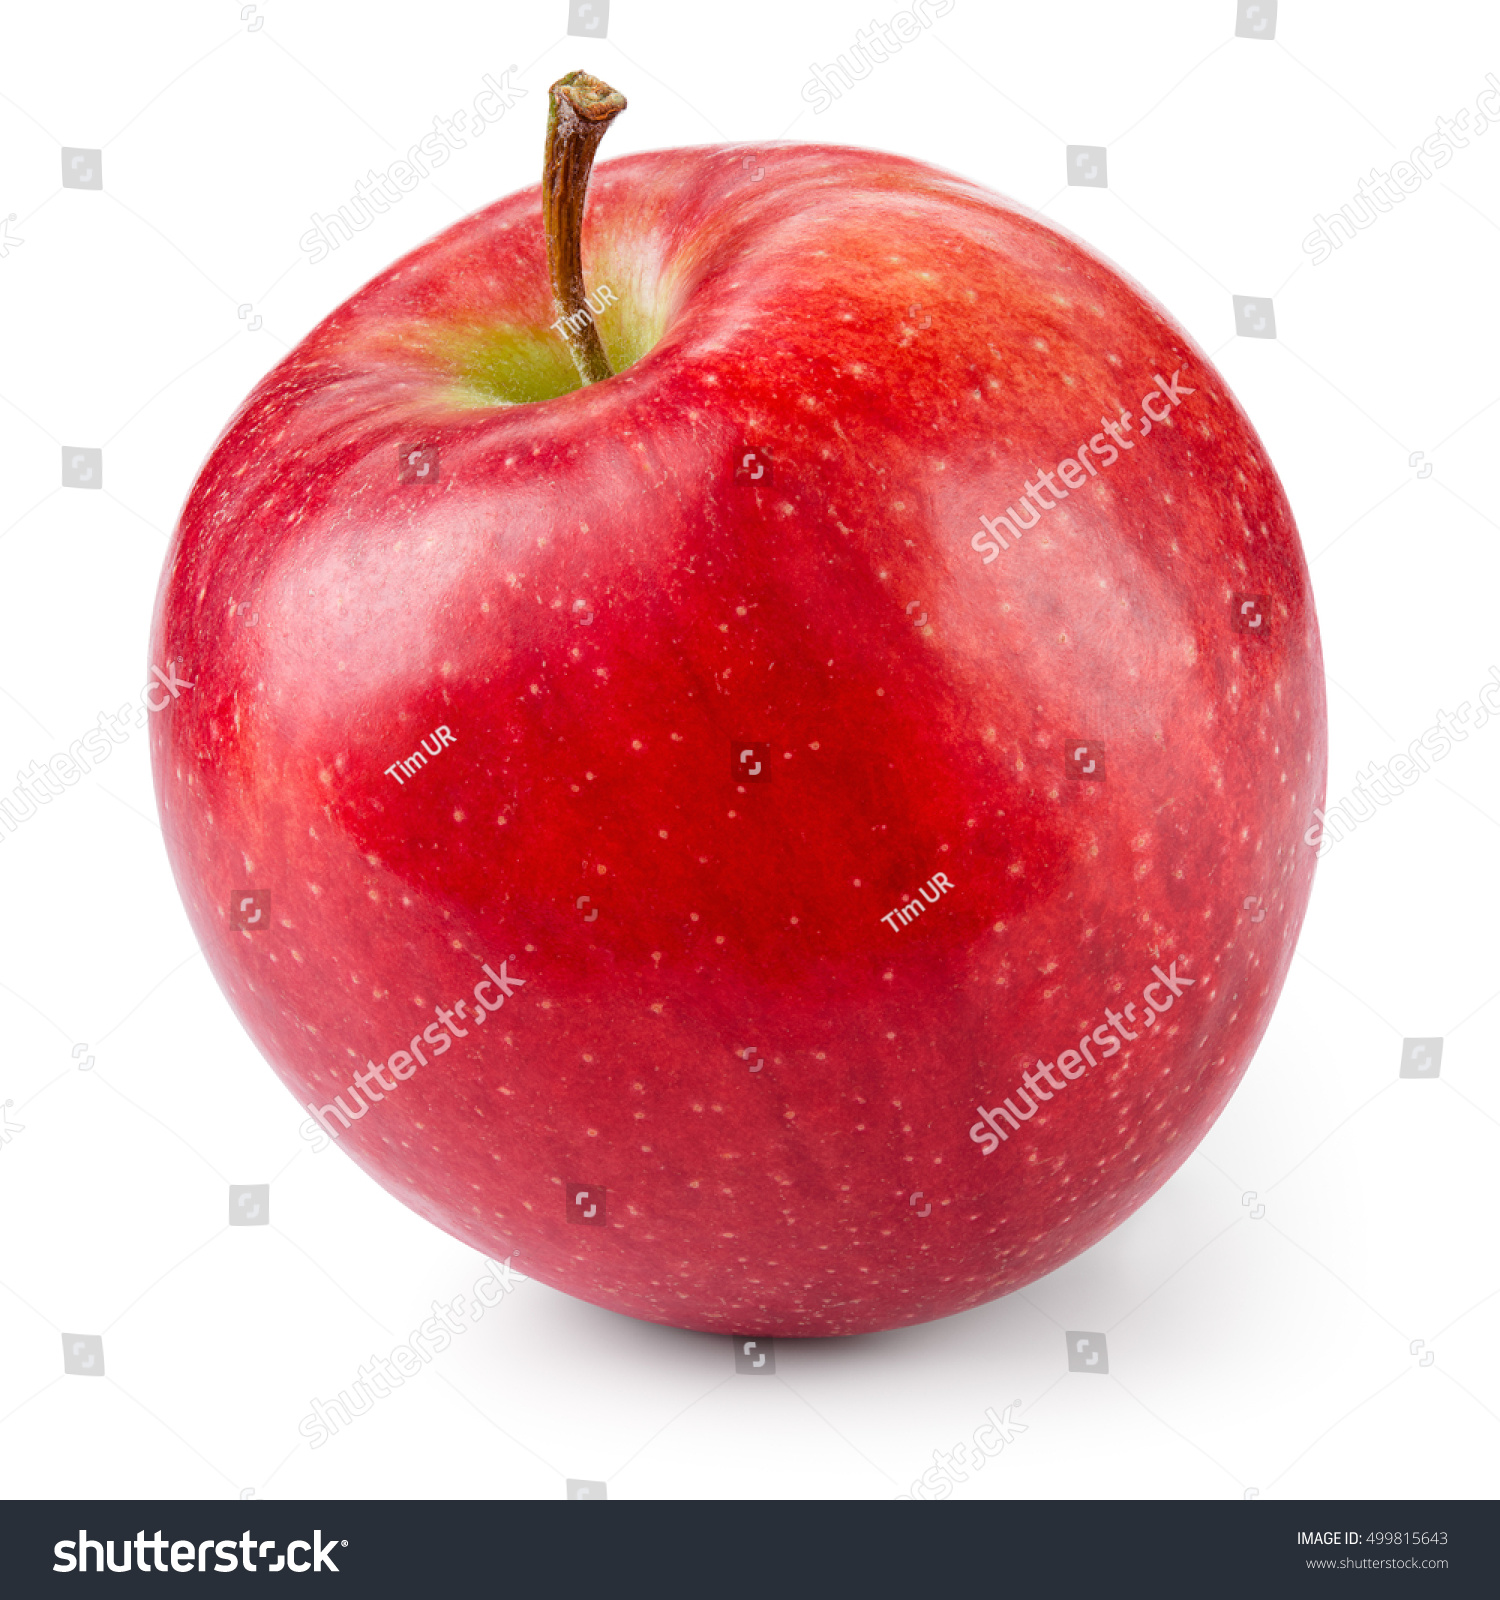 Fresh red apple isolated on white. With clipping path. #499815643